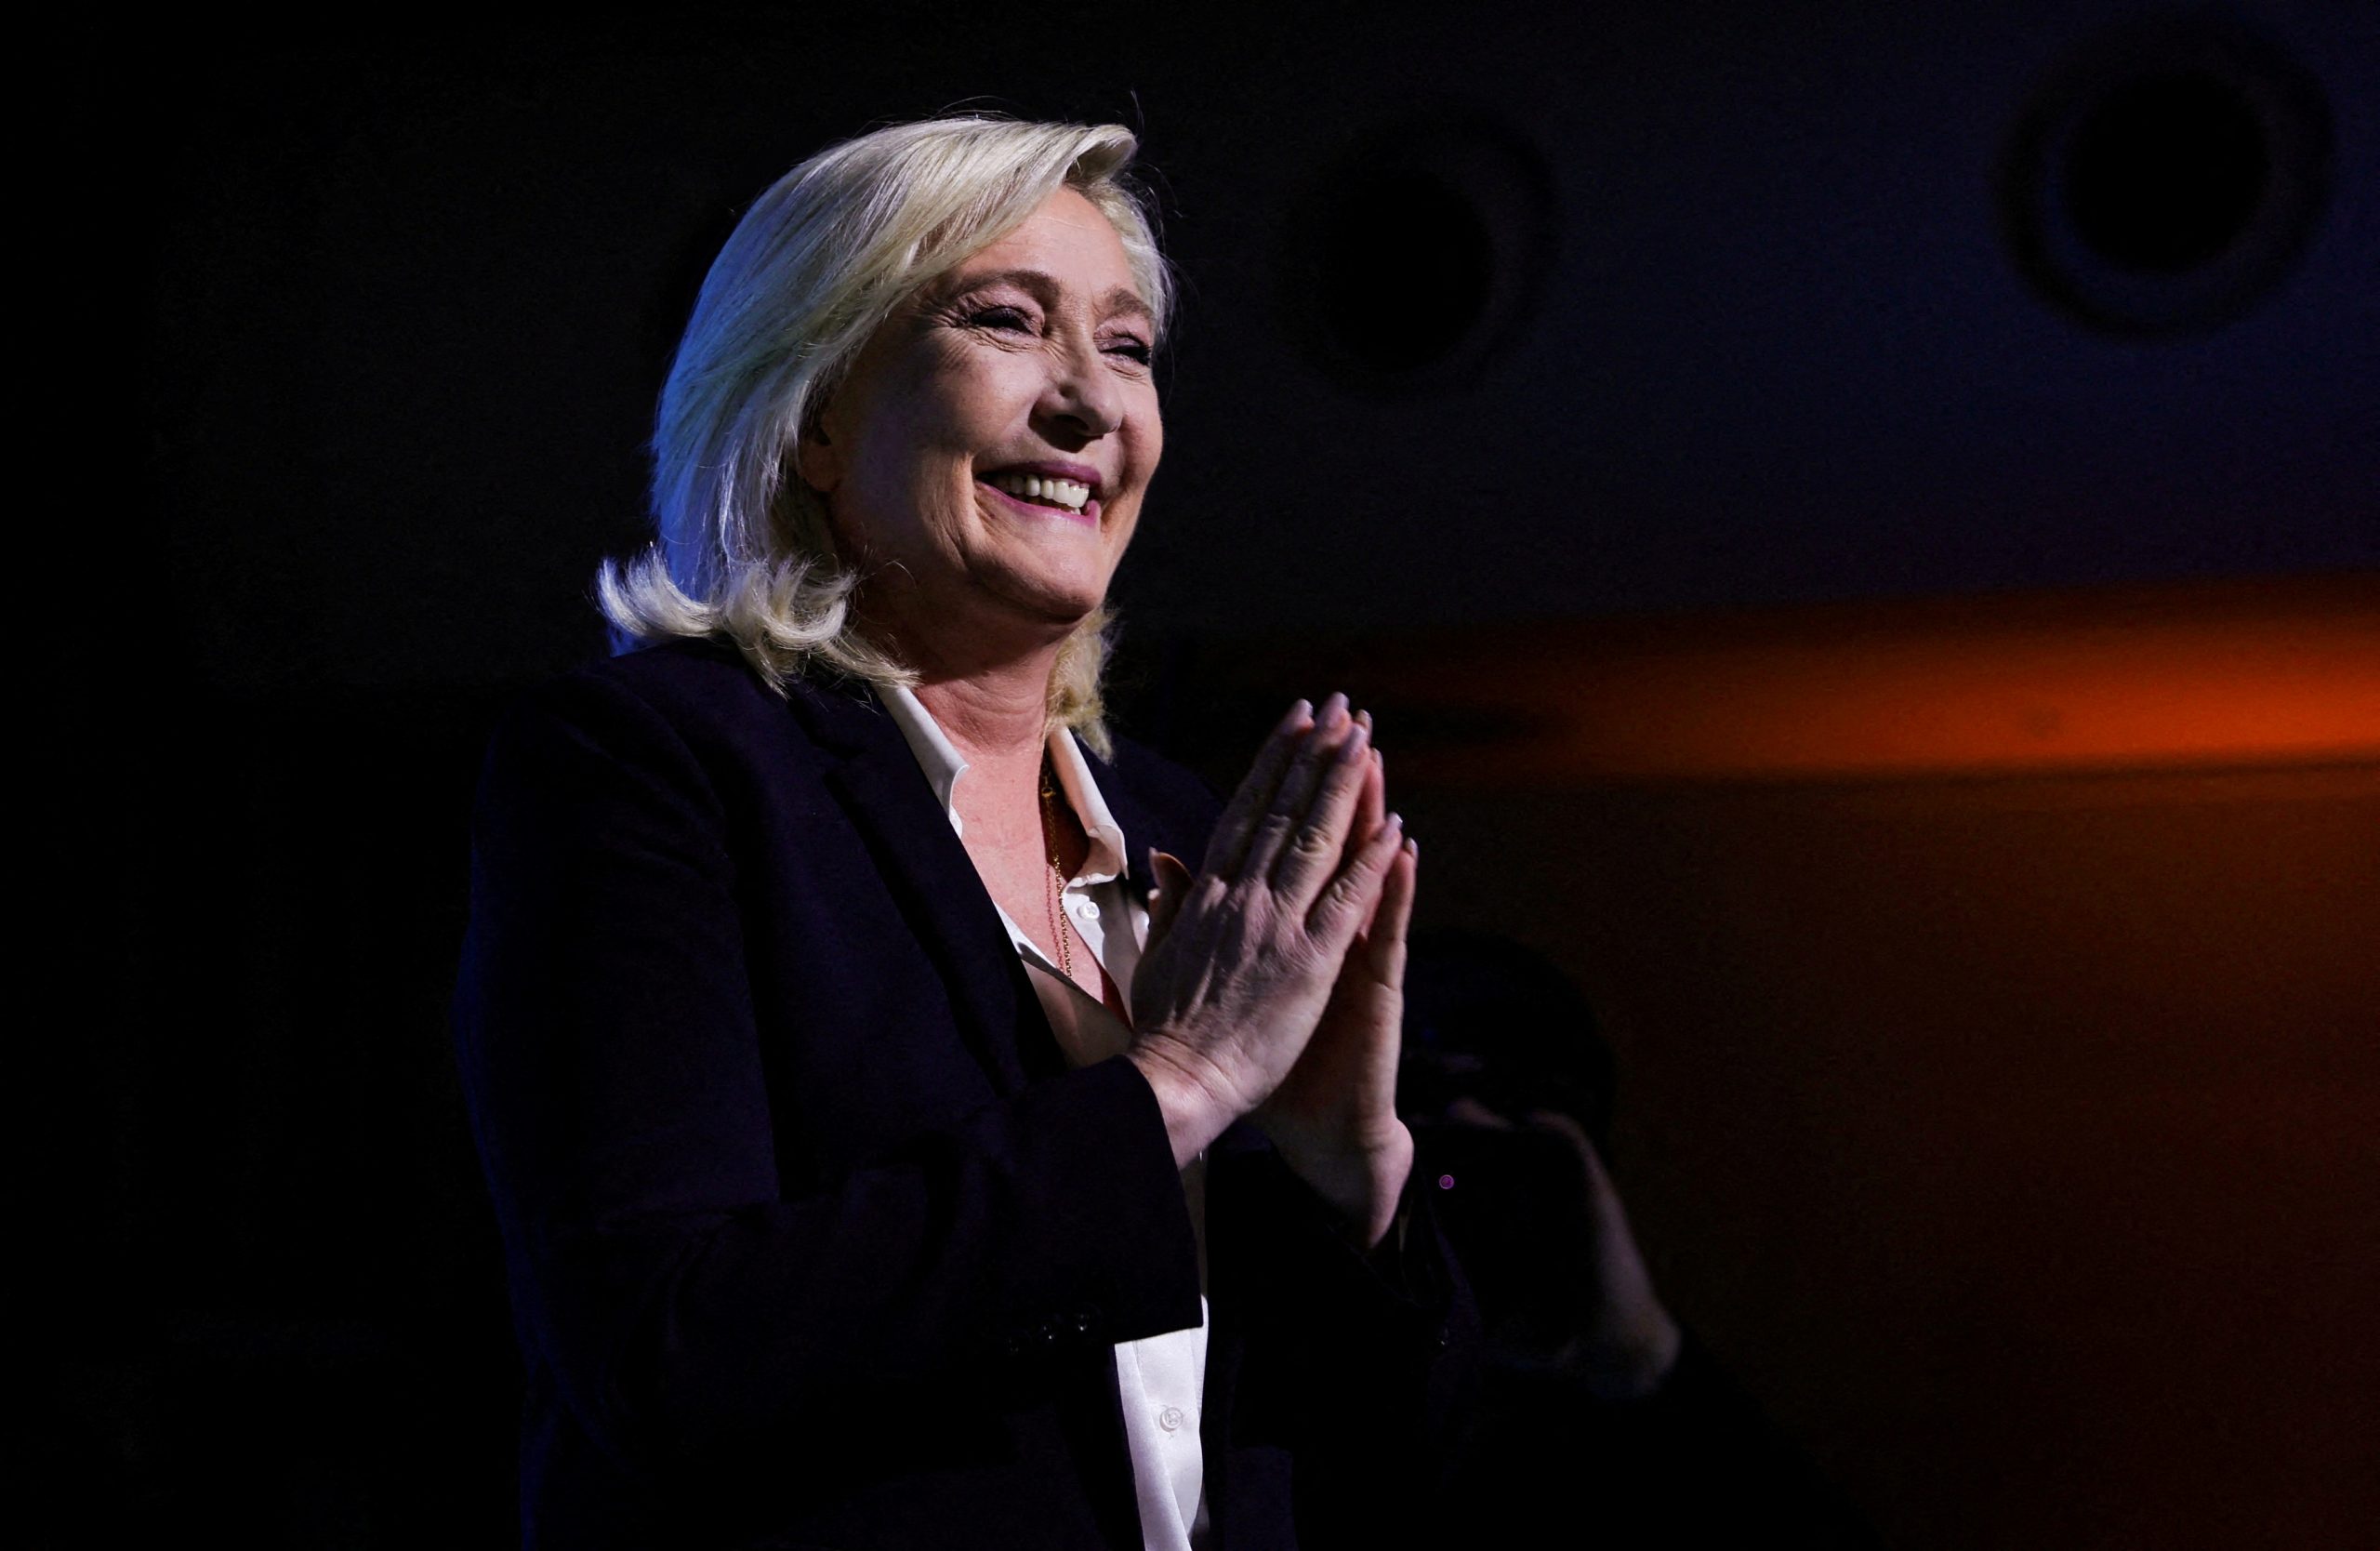 Why Americans Should Worry About Marine Le Pen - Atlantic Council